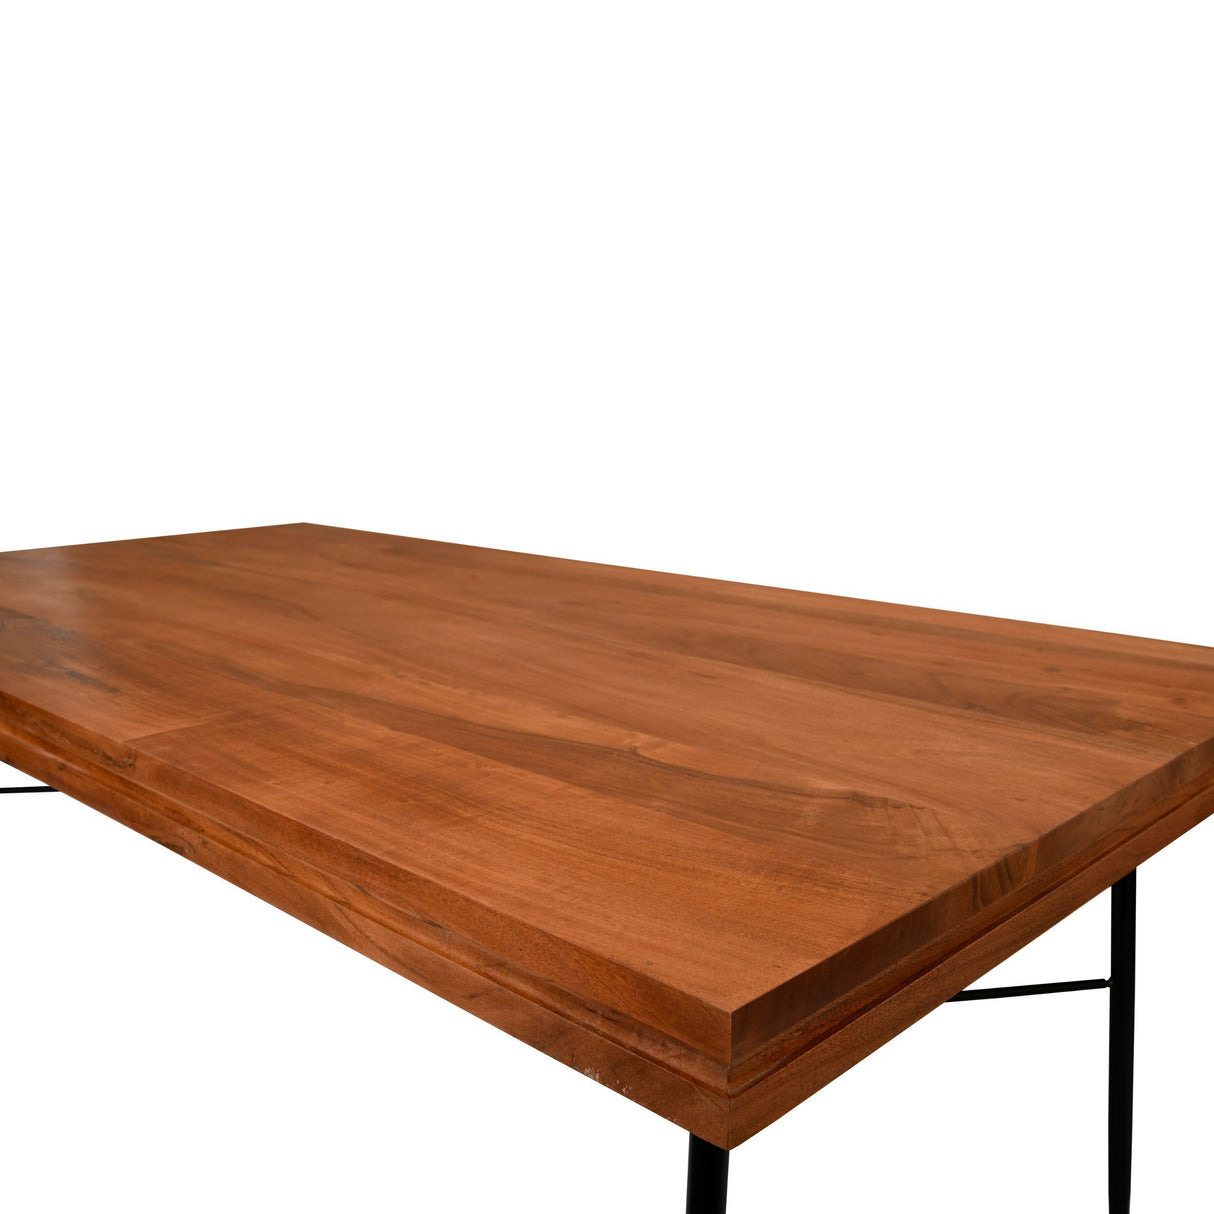 69 Inch Handcrafted Industrial Design Dining Table, Acacia Wood Top, Metal Legs, Black and Brown - Home Elegance USA